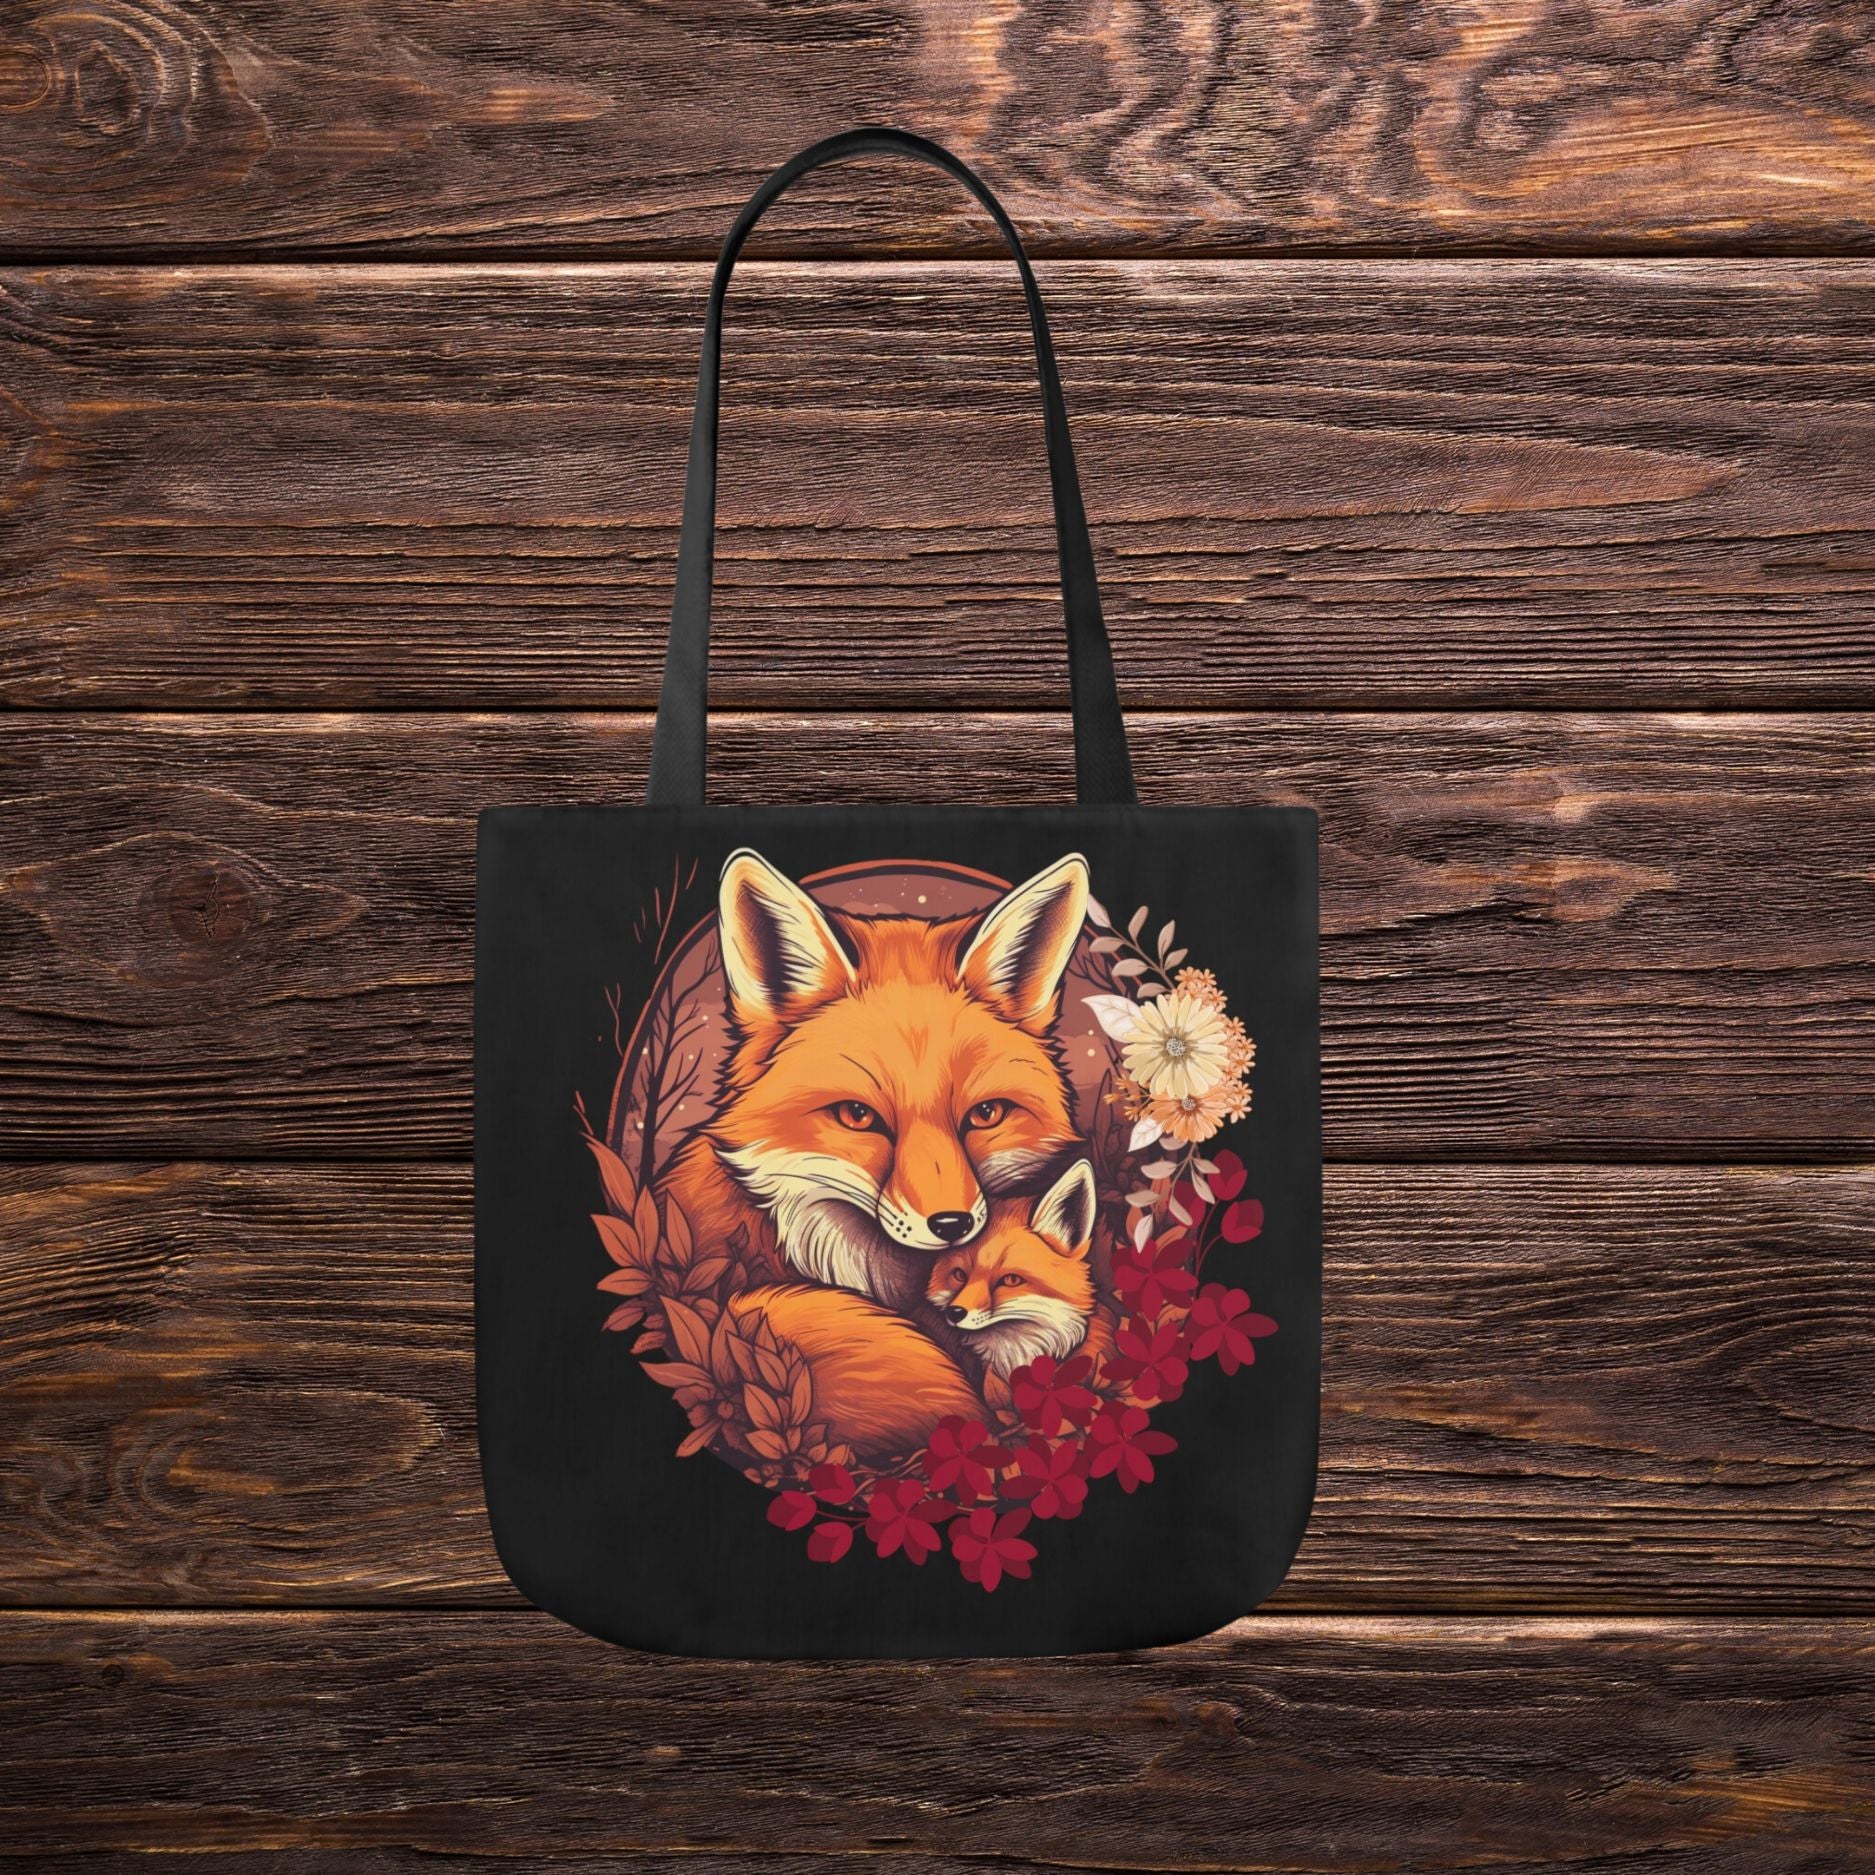 Cozy Cute Fox Cottagecore, Vintage Aesthetic Tote Bag, Woodland Green Witch Tootie | Whimsical Fashion Delights Accessories   